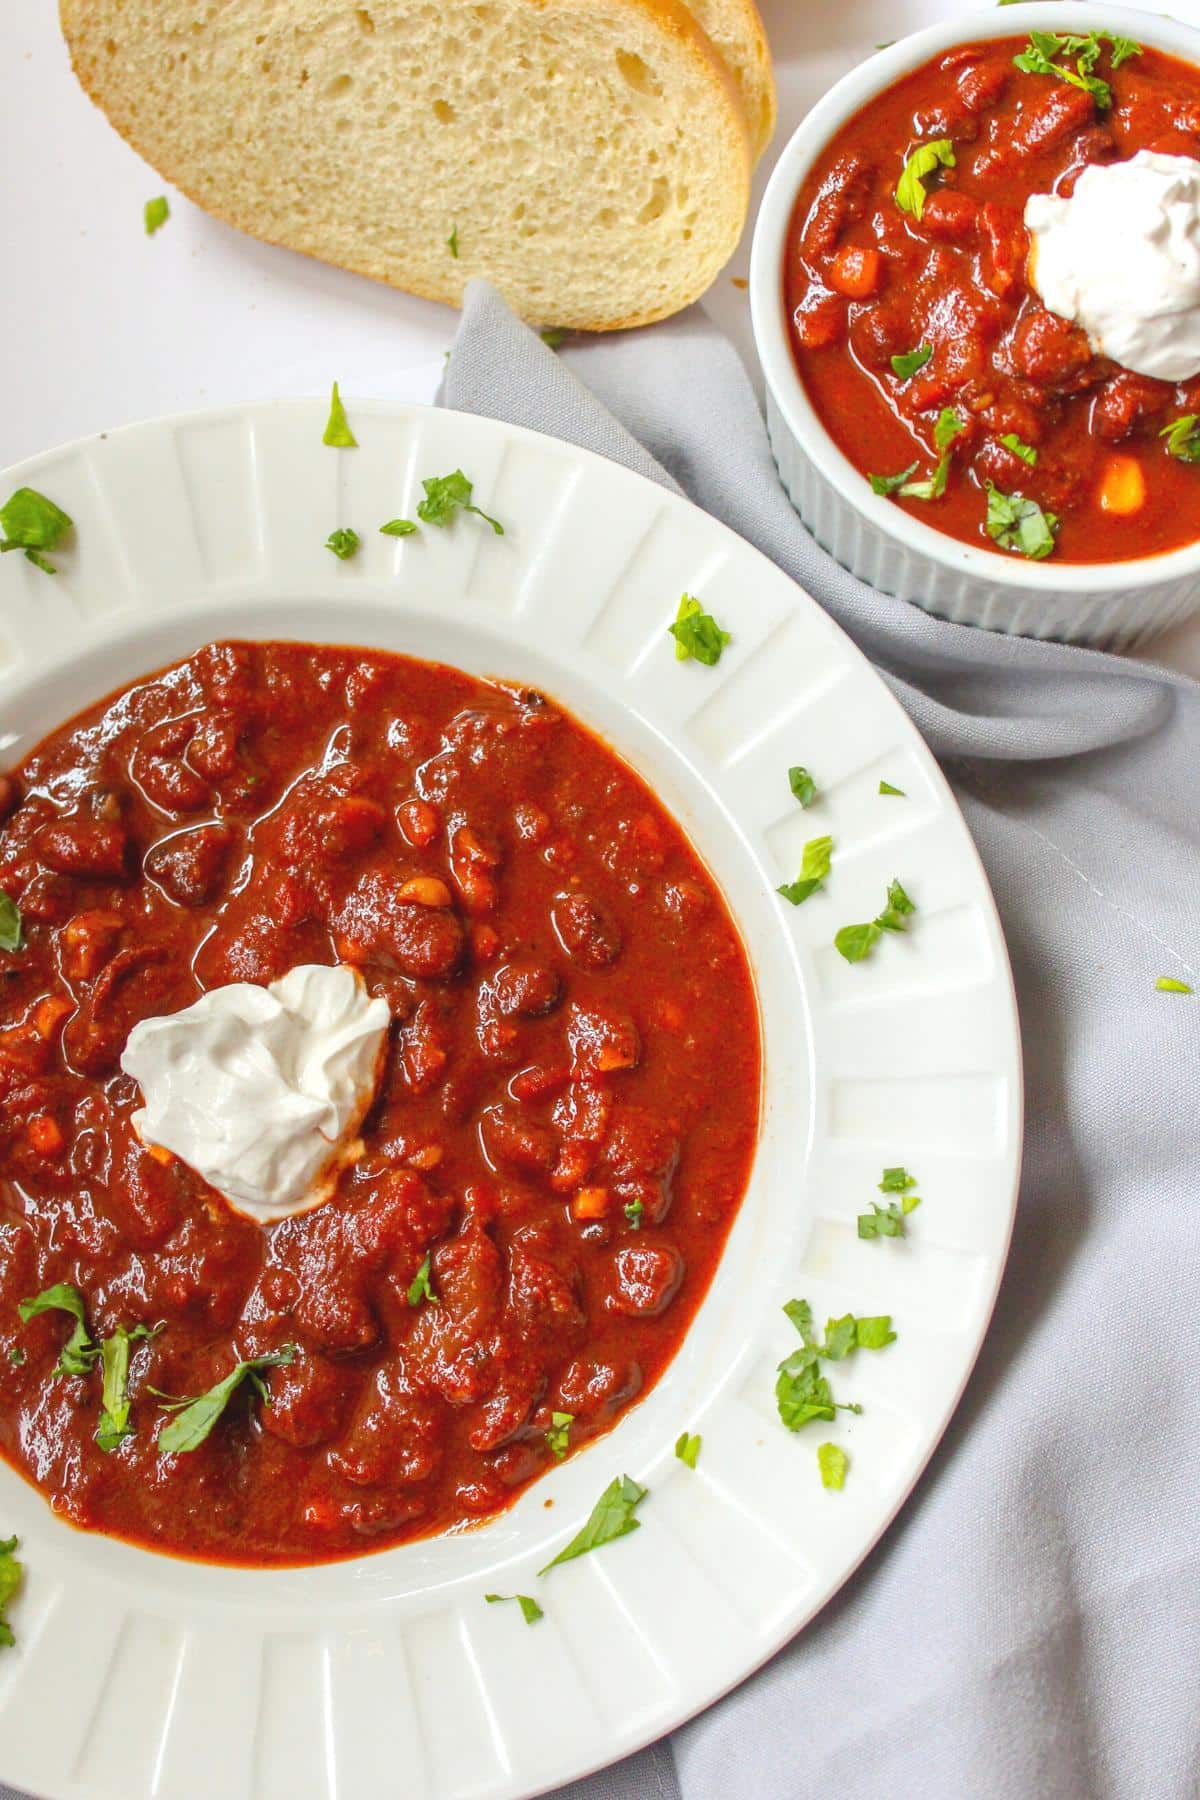 Vegan three bean chili in a bowl topped with sour cream next to sliced bread.